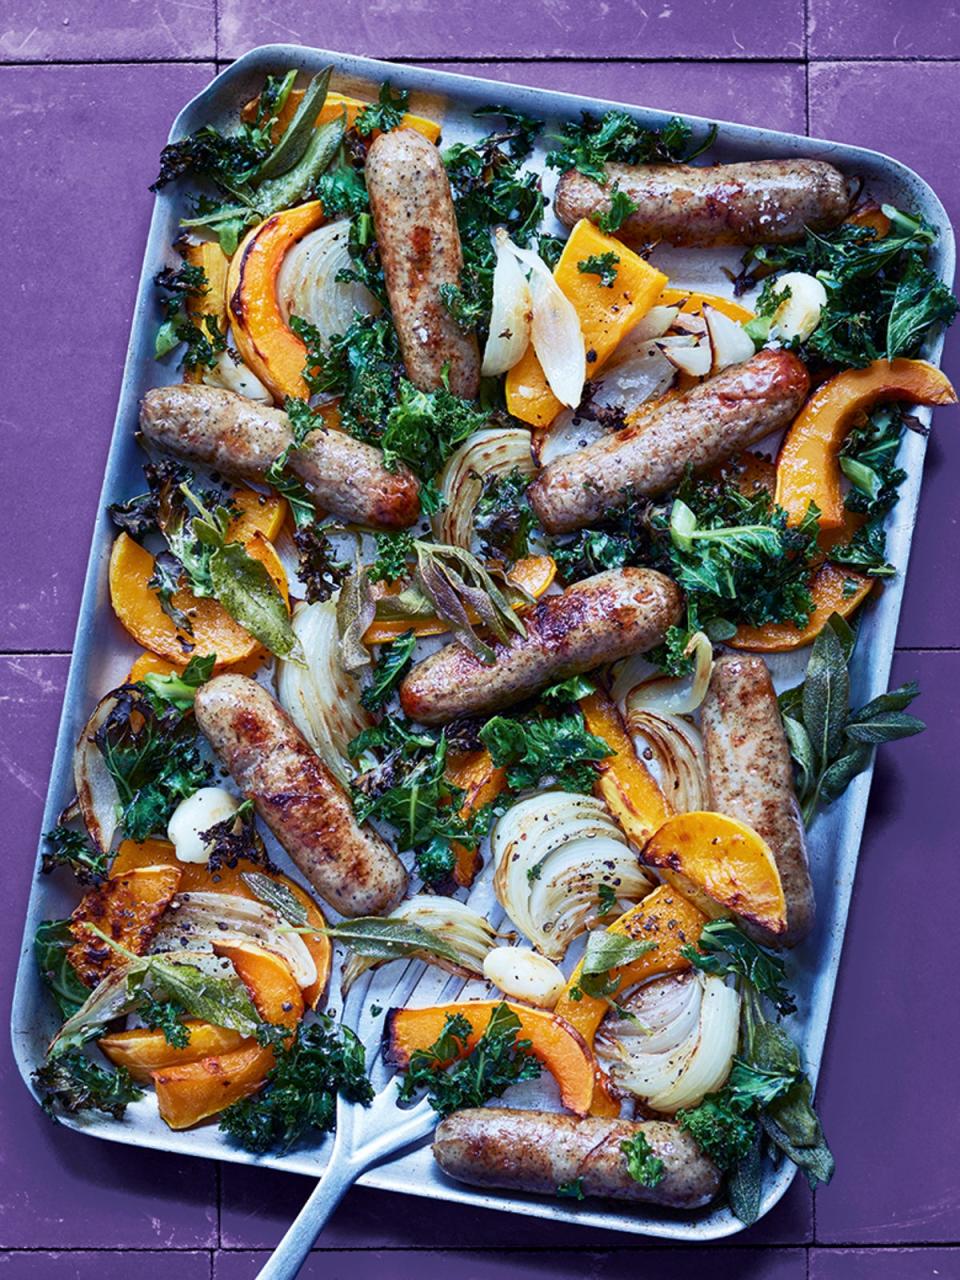 Let the oven do most of the work in this traybake (Lisa Faulkner/Ocado)